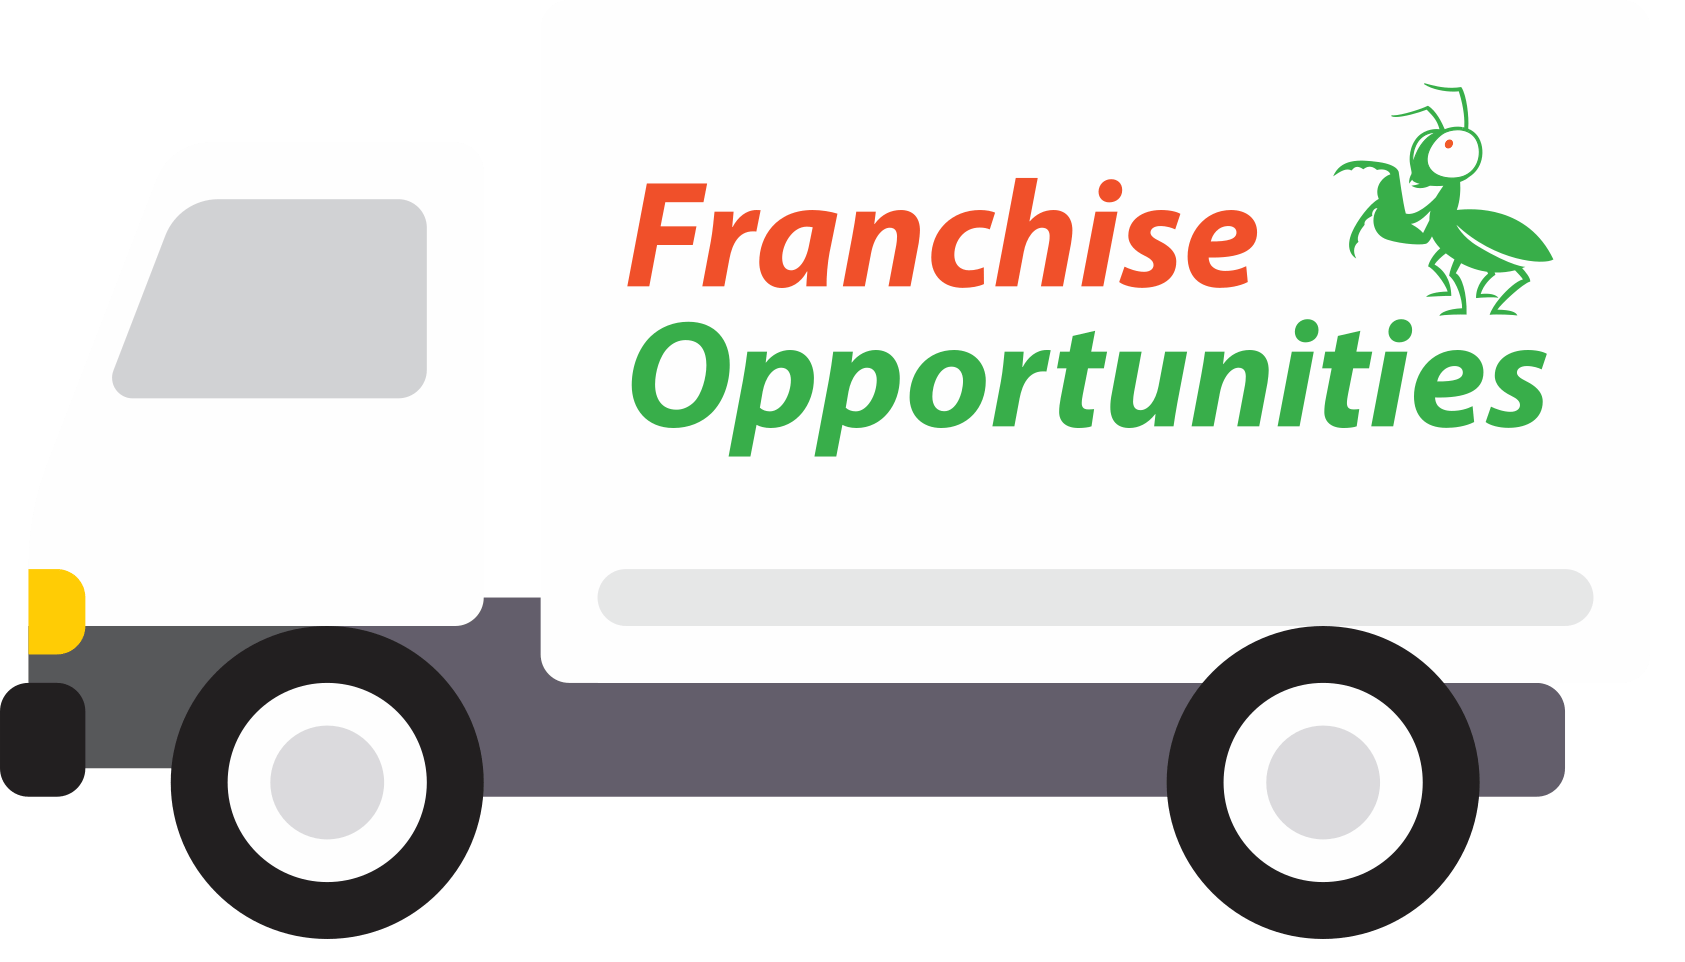 Franchise opportunities on the side of truck with Mantis logo